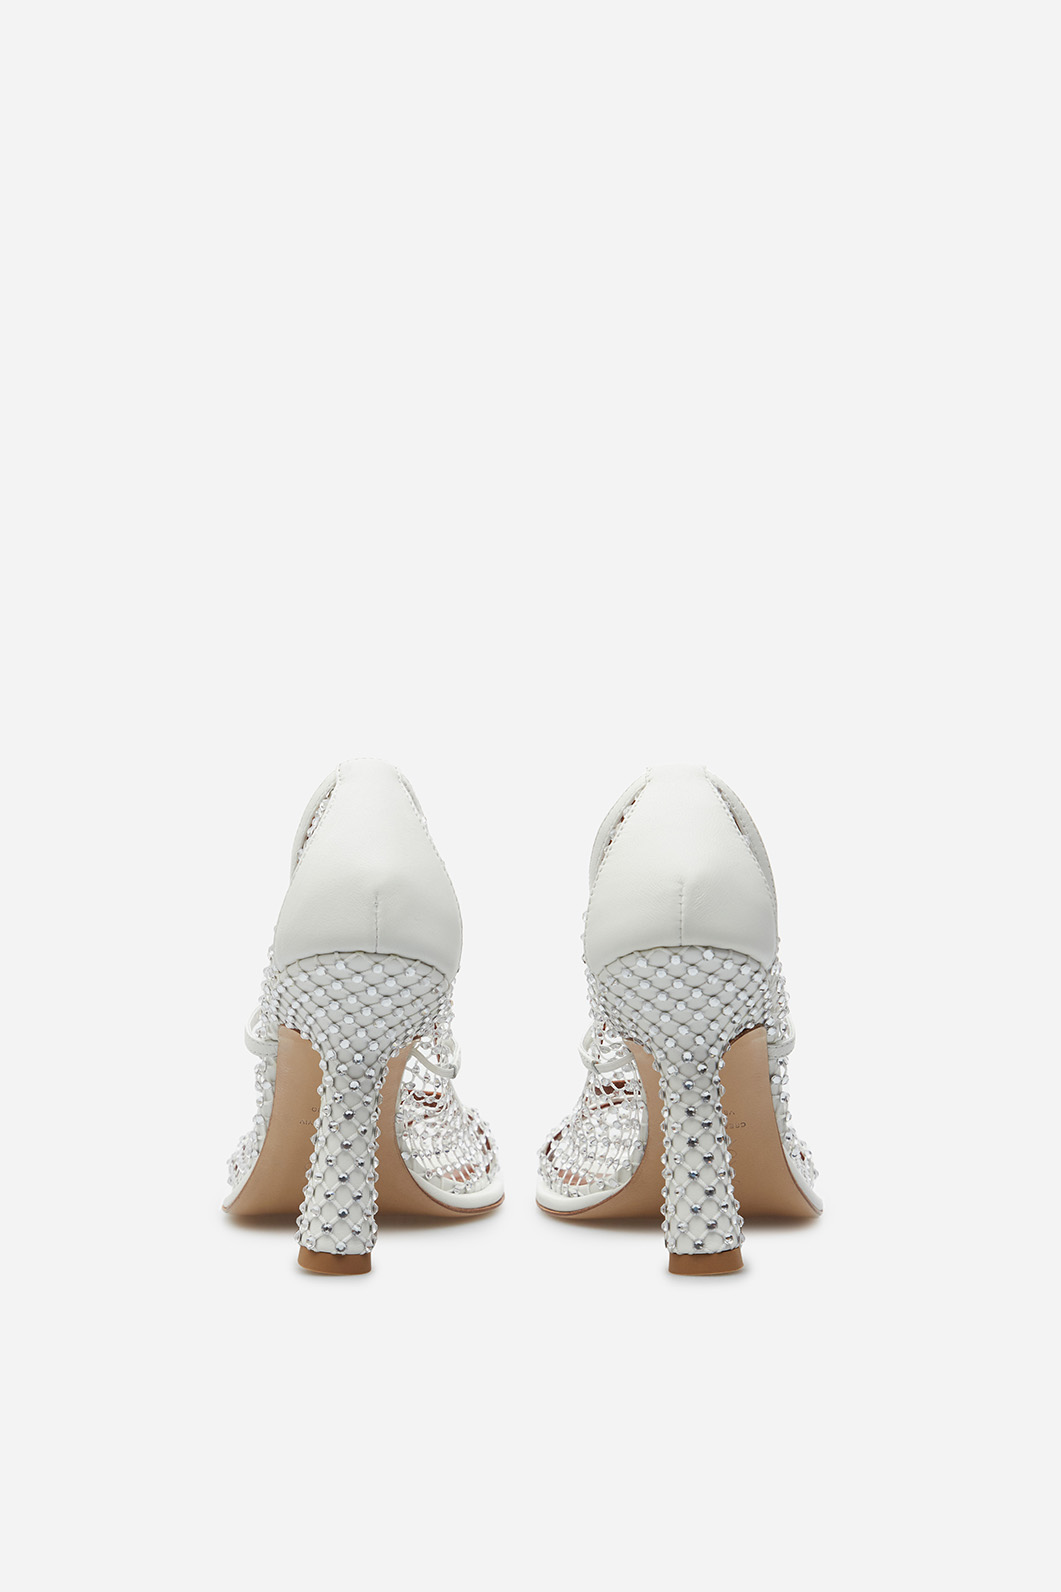 Jerry white leather with Swarovski crystals pumps